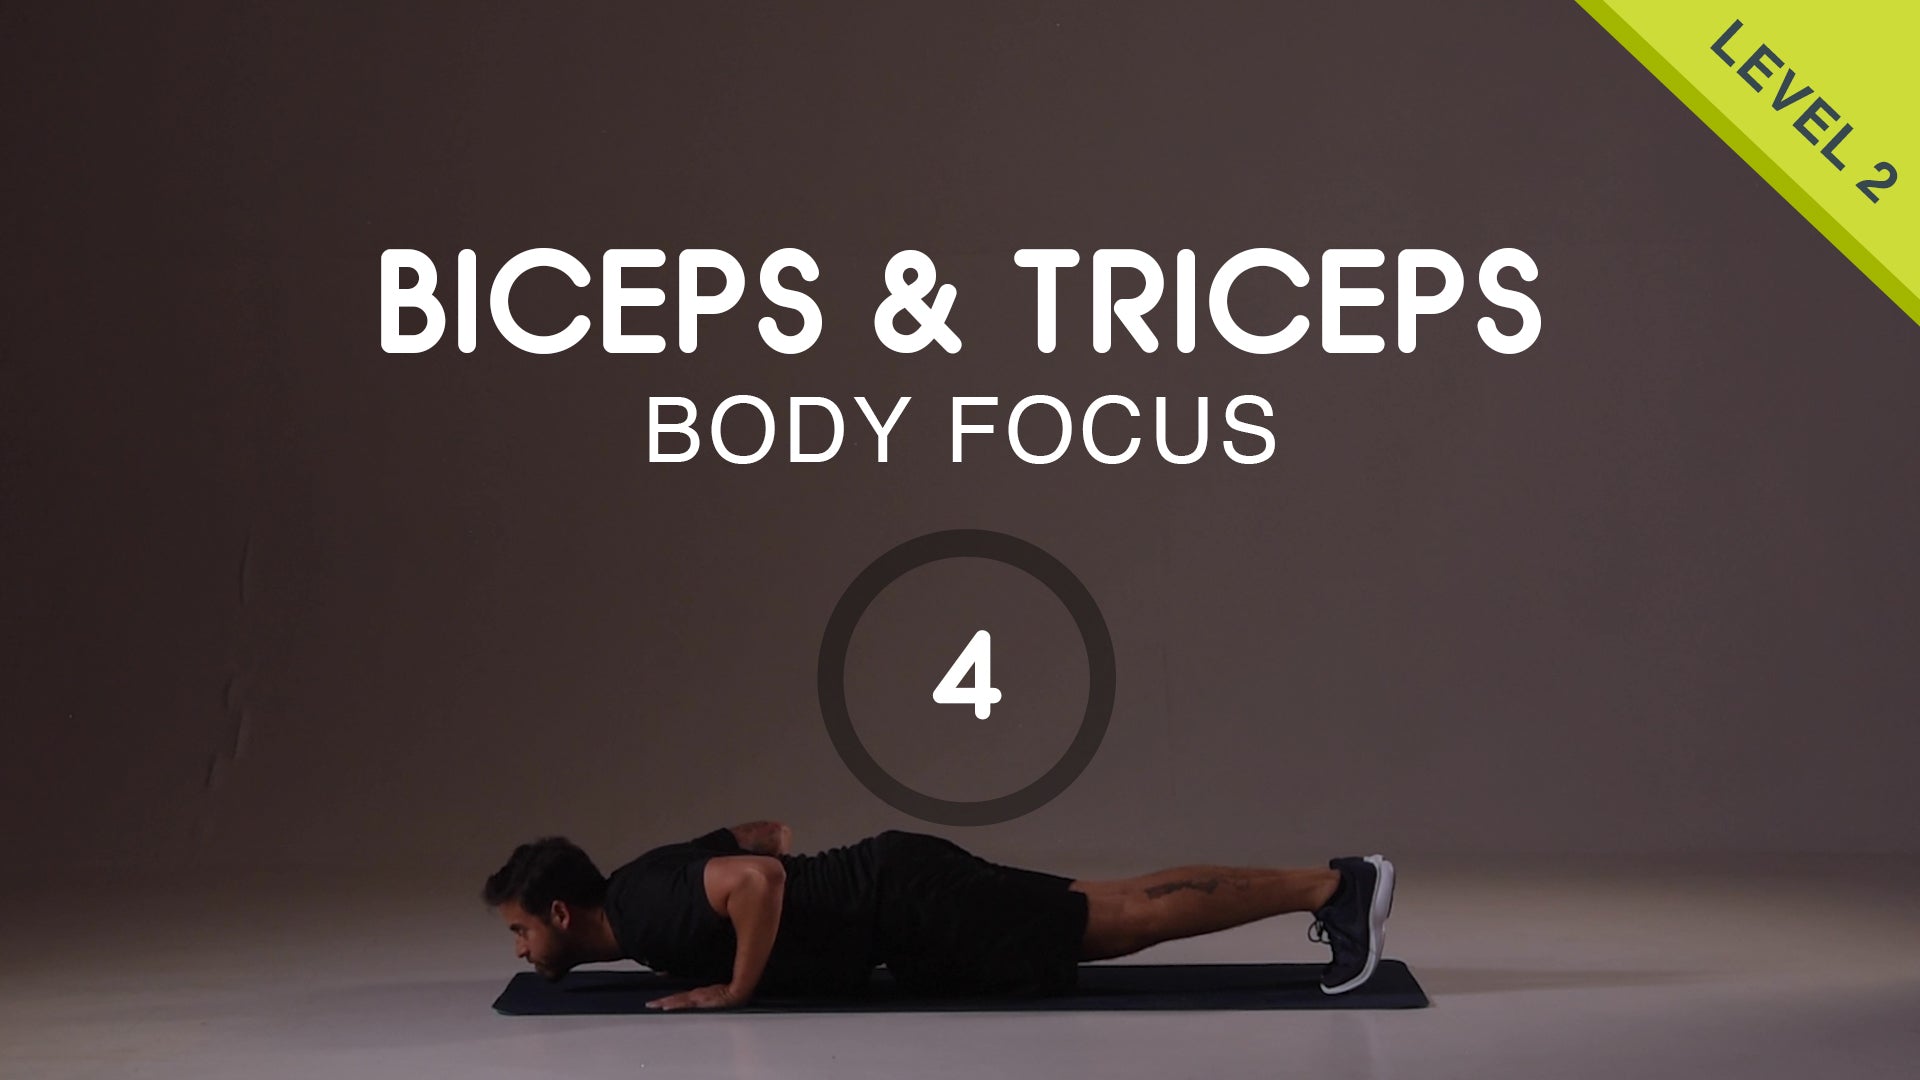 7 Minute Workout for Biceps and Triceps - Free Video – Group HIIT